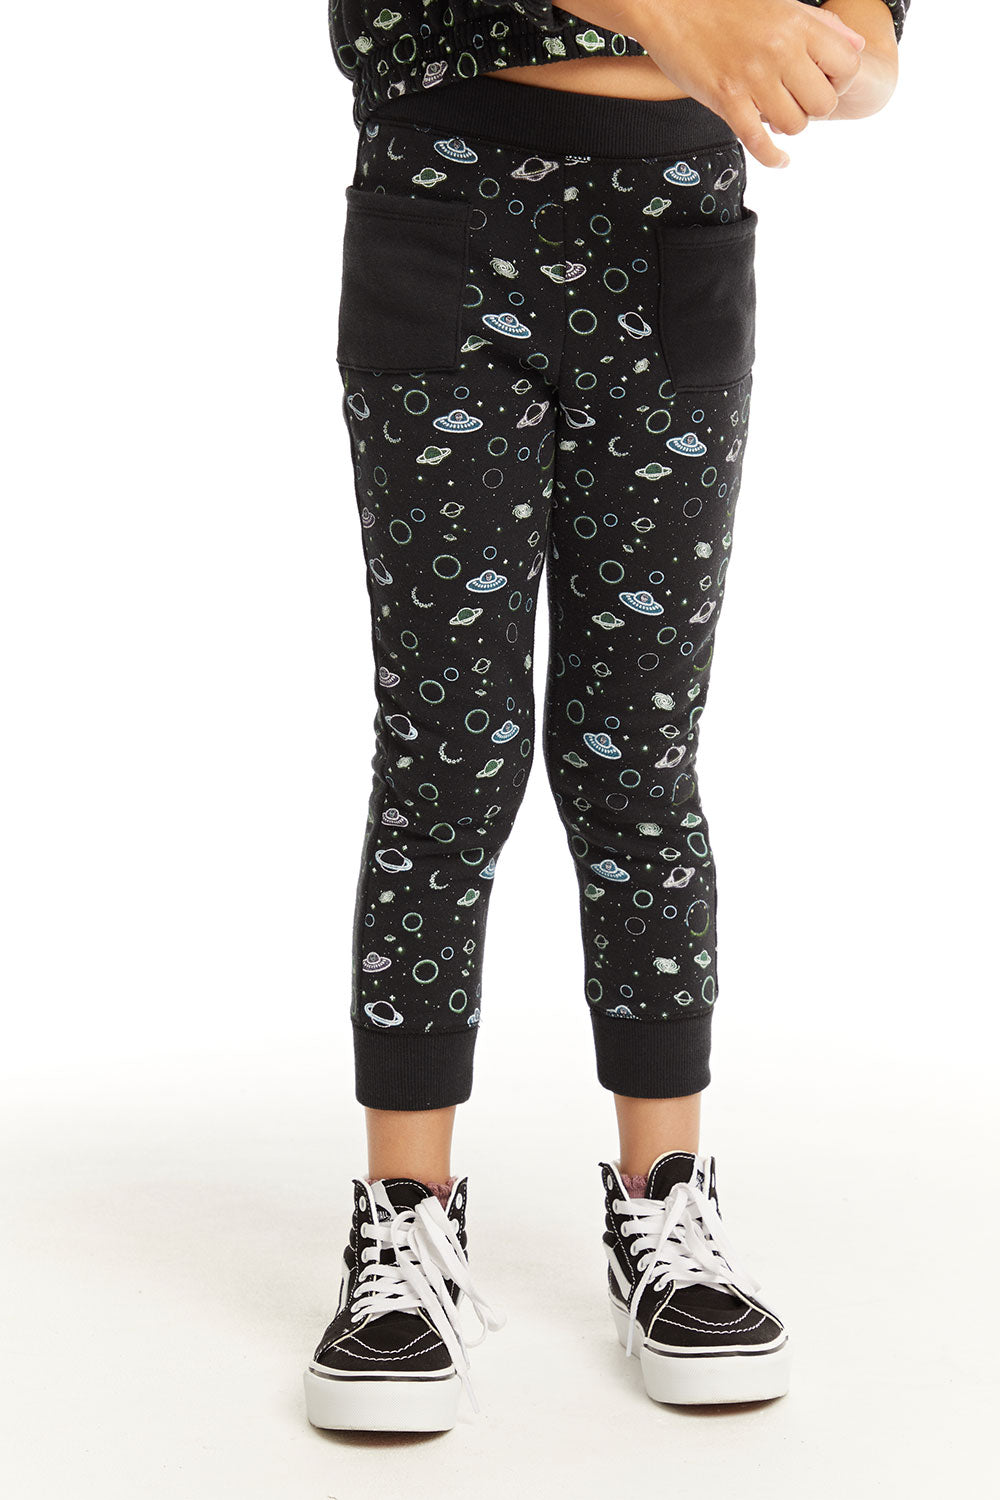 Neon Space Pants GIRLS chaserbrand